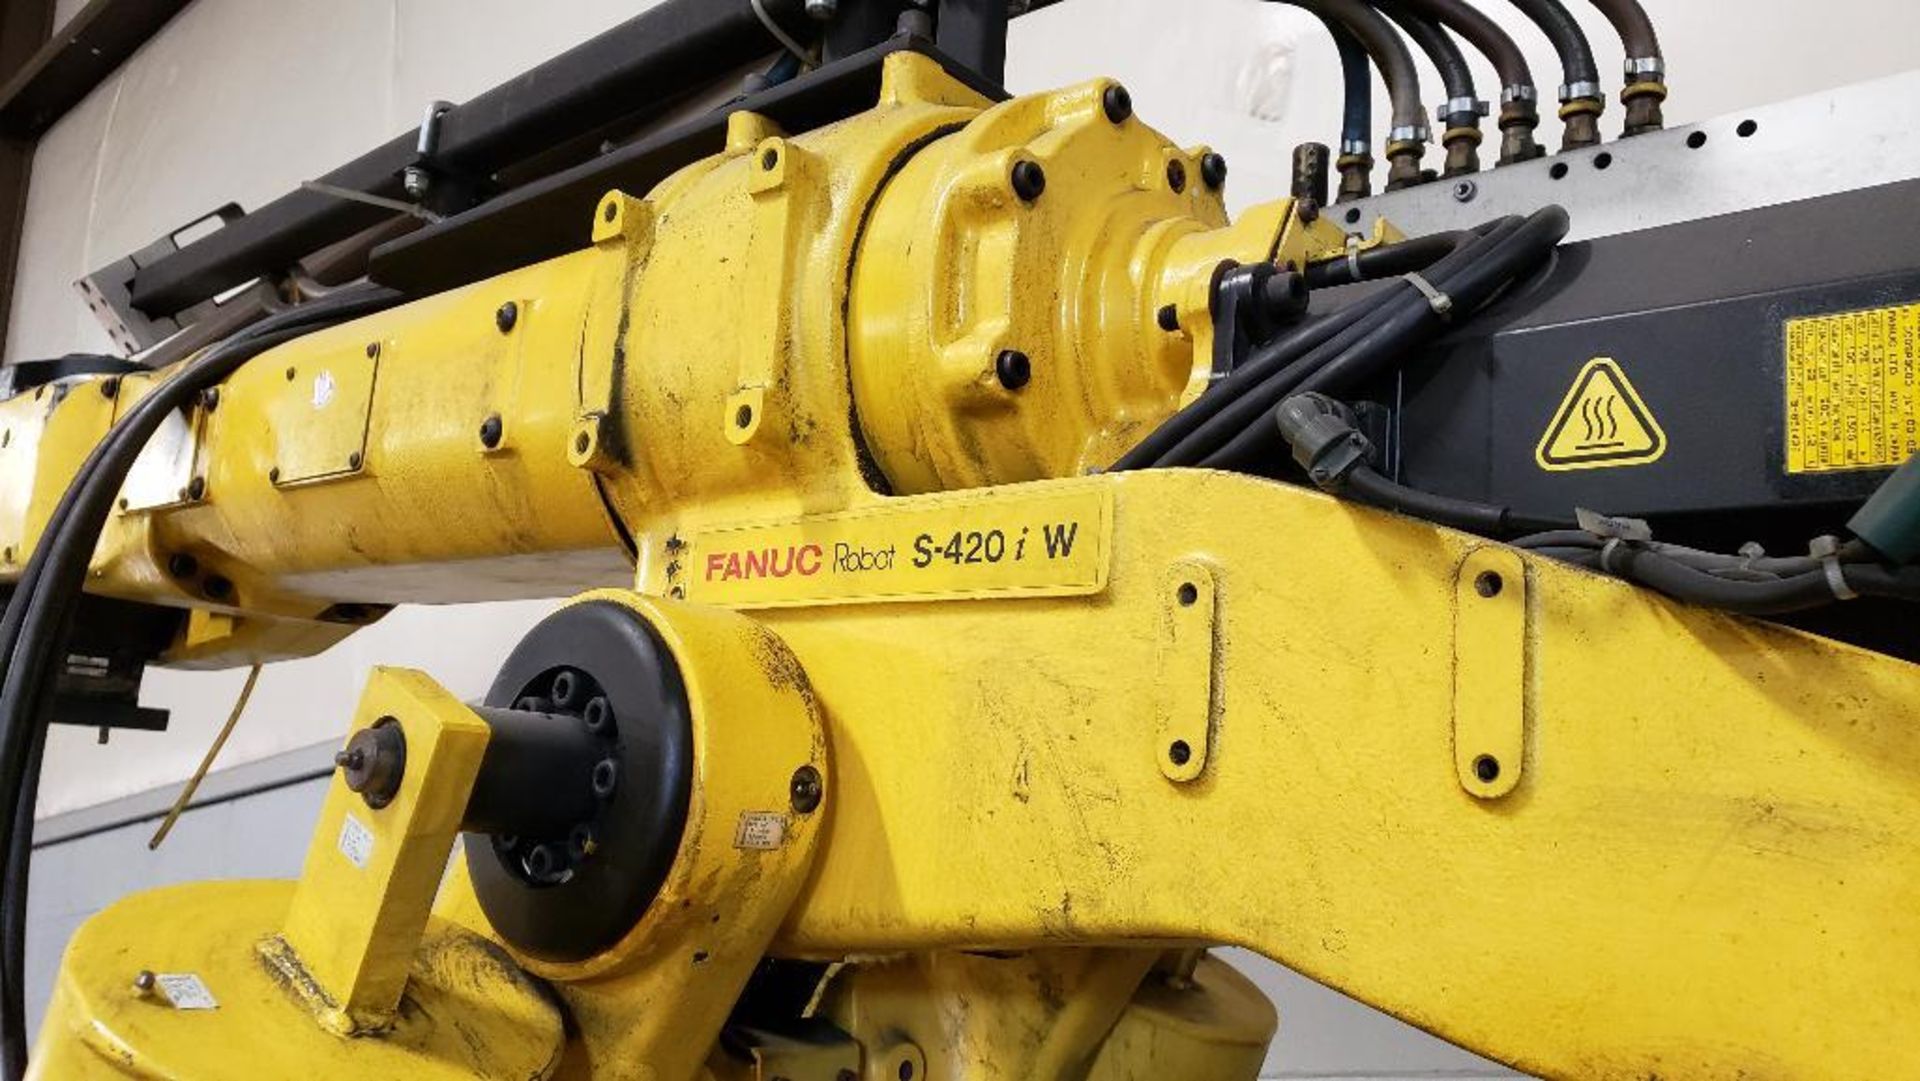 Fanuc S-420iW robot with R-J2 controller. - Image 9 of 14